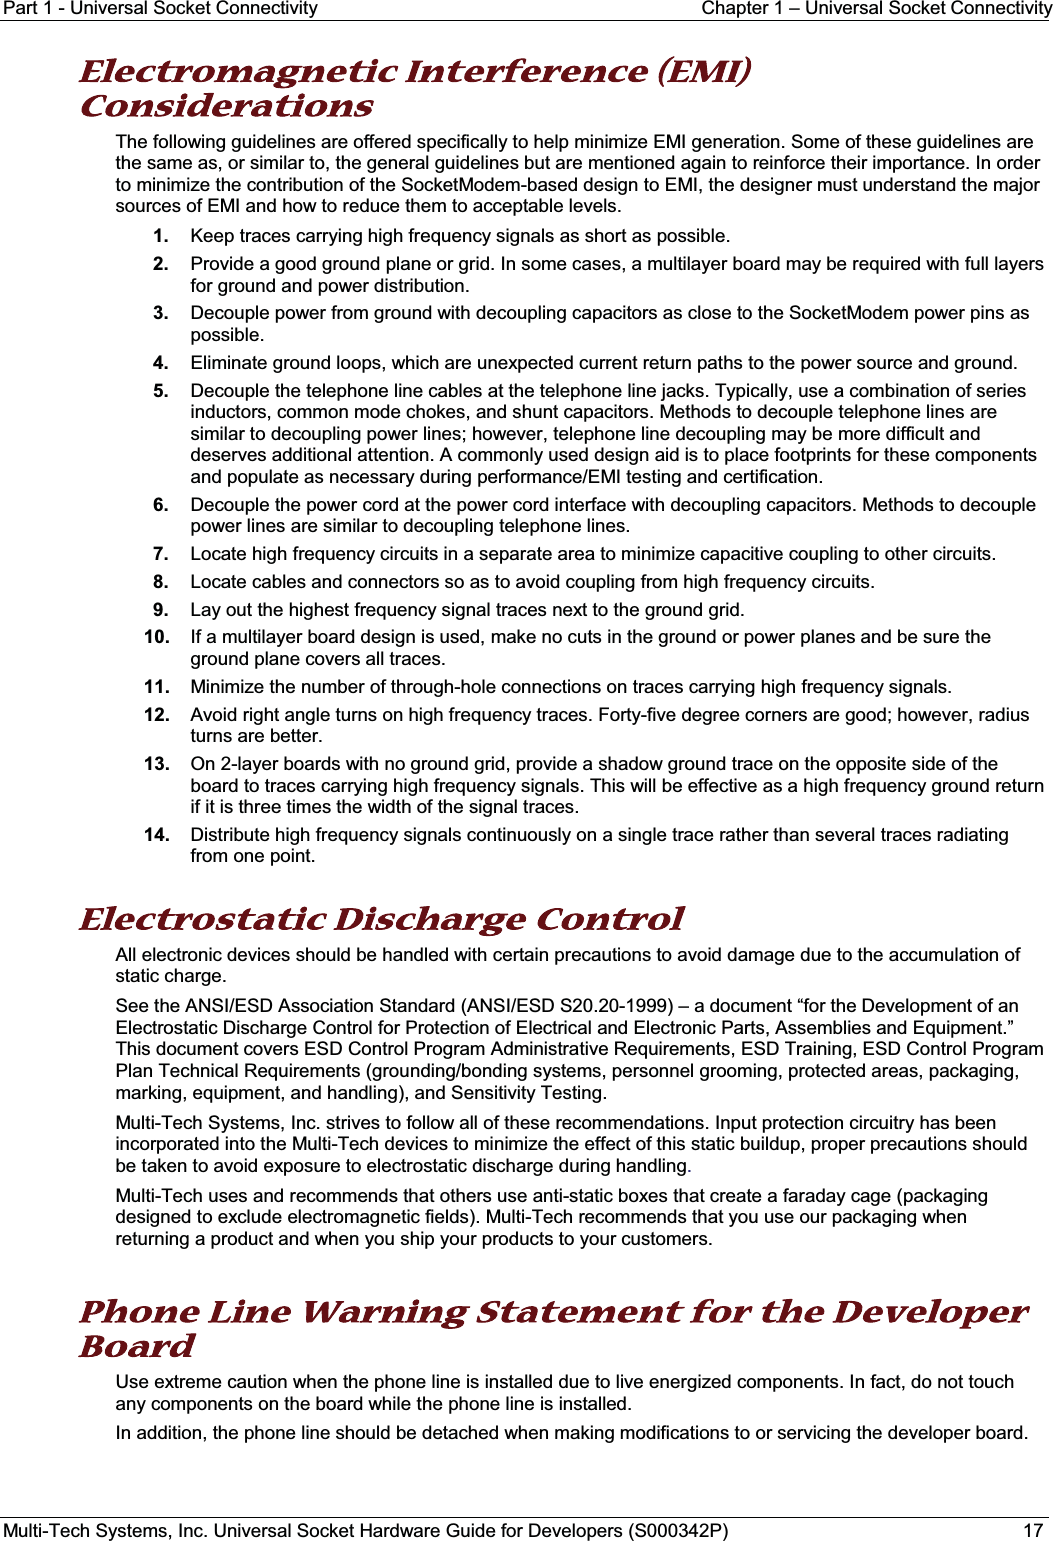 Part 1 - Universal Socket Connectivity Chapter 1 – Universal Socket ConnectivityMulti-Tech Systems, Inc. Universal Socket Hardware Guide for Developers (S000342P) 17EElectromagnetic Interference (EMI) Considerations The following guidelines are offered specifically to help minimize EMI generation. Some of these guidelines are the same as, or similar to, the general guidelines but are mentioned again to reinforce their importance. In order to minimize the contribution of the SocketModem-based design to EMI, the designer must understand the major sources of EMI and how to reduce them to acceptable levels. 1. Keep traces carrying high frequency signals as short as possible.2. Provide a good ground plane or grid. In some cases, a multilayer board may be required with full layers for ground and power distribution.3. Decouple power from ground with decoupling capacitors as close to the SocketModem power pins as possible.4. Eliminate ground loops, which are unexpected current return paths to the power source and ground.5. Decouple the telephone line cables at the telephone line jacks. Typically, use a combination of series inductors, common mode chokes, and shunt capacitors. Methods to decouple telephone lines are similar to decoupling power lines; however, telephone line decoupling may be more difficult and deserves additional attention. A commonly used design aid is to place footprints for these components and populate as necessary during performance/EMI testing and certification.6. Decouple the power cord at the power cord interface with decoupling capacitors. Methods to decouple power lines are similar to decoupling telephone lines.7. Locate high frequency circuits in a separate area to minimize capacitive coupling to other circuits.8. Locate cables and connectors so as to avoid coupling from high frequency circuits.9. Lay out the highest frequency signal traces next to the ground grid.10. If a multilayer board design is used, make no cuts in the ground or power planes and be sure the ground plane covers all traces.11. Minimize the number of through-hole connections on traces carrying high frequency signals.12. Avoid right angle turns on high frequency traces. Forty-five degree corners are good; however, radius turns are better.13. On 2-layer boards with no ground grid, provide a shadow ground trace on the opposite side of the board to traces carrying high frequency signals. This will be effective as a high frequency ground return if it is three times the width of the signal traces.14. Distribute high frequency signals continuously on a single trace rather than several traces radiating from one point.Electrostatic Discharge Control All electronic devices should be handled with certain precautions to avoid damage due to the accumulation of static charge. See the ANSI/ESD Association Standard (ANSI/ESD S20.20-1999) – a document “for the Development of an Electrostatic Discharge Control for Protection of Electrical and Electronic Parts, Assemblies and Equipment.” This document covers ESD Control Program Administrative Requirements, ESD Training, ESD Control Program Plan Technical Requirements (grounding/bonding systems, personnel grooming, protected areas, packaging, marking, equipment, and handling), and Sensitivity Testing.Multi-Tech Systems, Inc. strives to follow all of these recommendations. Input protection circuitry has been incorporated into the Multi-Tech devices to minimize the effect of this static buildup, proper precautions should be taken to avoid exposure to electrostatic discharge during handling.Multi-Tech uses and recommends that others use anti-static boxes that create a faraday cage (packagingdesigned to exclude electromagnetic fields). Multi-Tech recommends that you use our packaging when returning a product and when you ship your products to your customers.Phone Line Warning Statement for the Developer Board Use extreme caution when the phone line is installed due to live energized components. In fact, do not touch any components on the board while the phone line is installed. In addition, the phone line should be detached when making modifications to or servicing the developer board.  